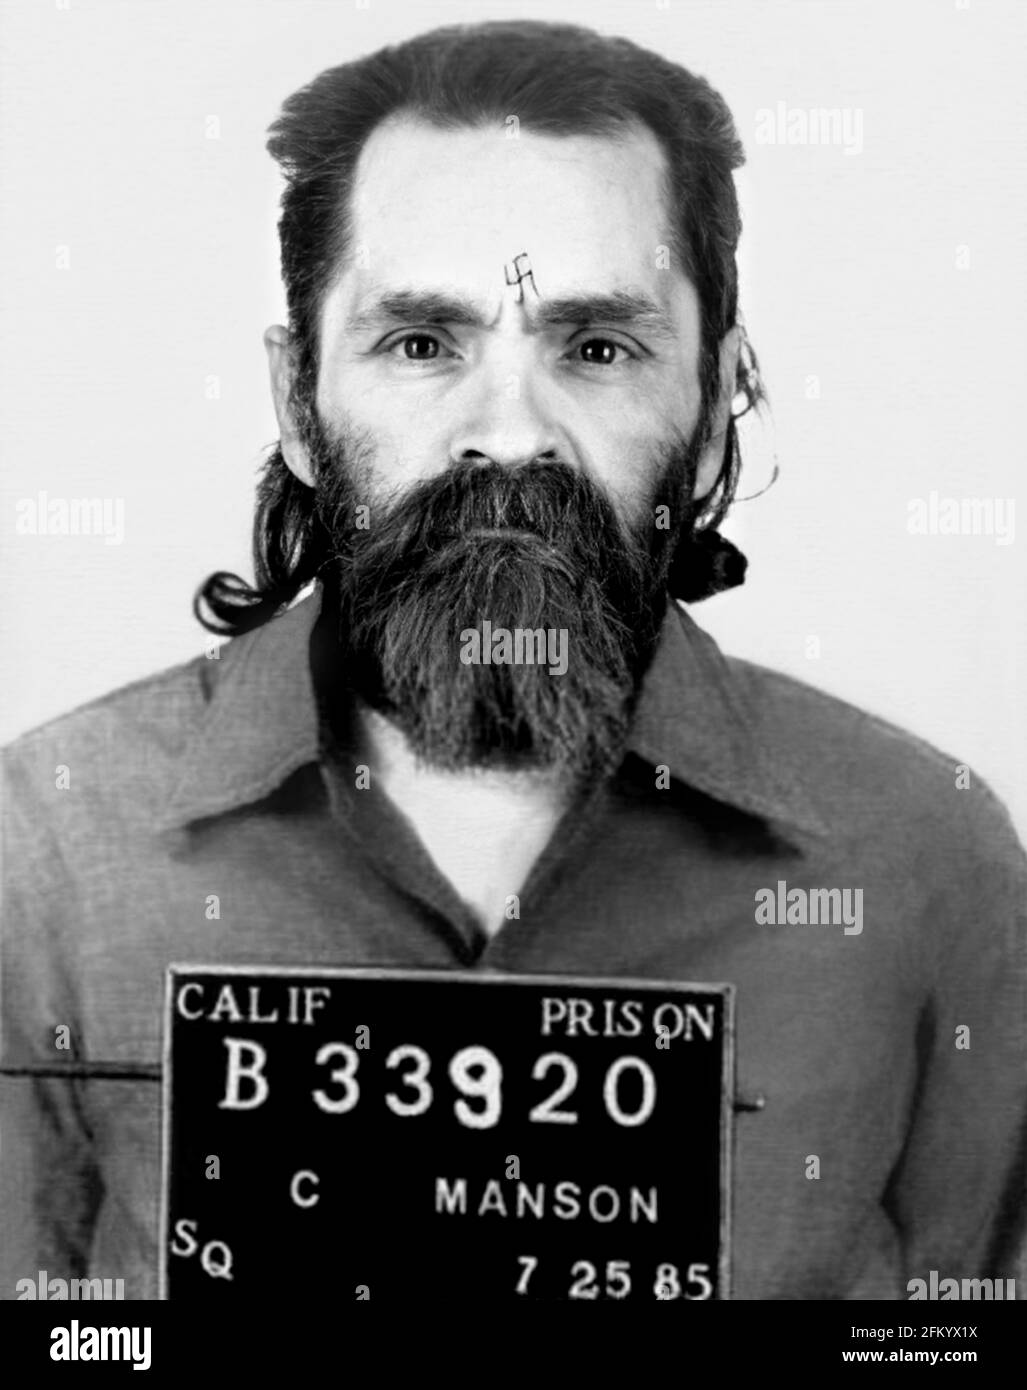 1985 , 25 july , USA : Mugshot of famous american satanist cult leader and criminal killer CHARLES MANSON SATANA ( 1934 - 2017 ). In mid-1967, he formed what became known as the ' Manson Family ', a quasi-commune based in California. His followers committed a series of nine murders at four locations in July and August 1969 . In 1971, he was convicted of first-degree murder and conspiracy to commit murder for the deaths of seven people, including the film actress Sharon Tate . Unknown photographer of California Prison . - MUGSHOT - Mug Shot - Mug-Shot - SVASTICA nazista - nazi nazist SVASTIKA - Stock Photo